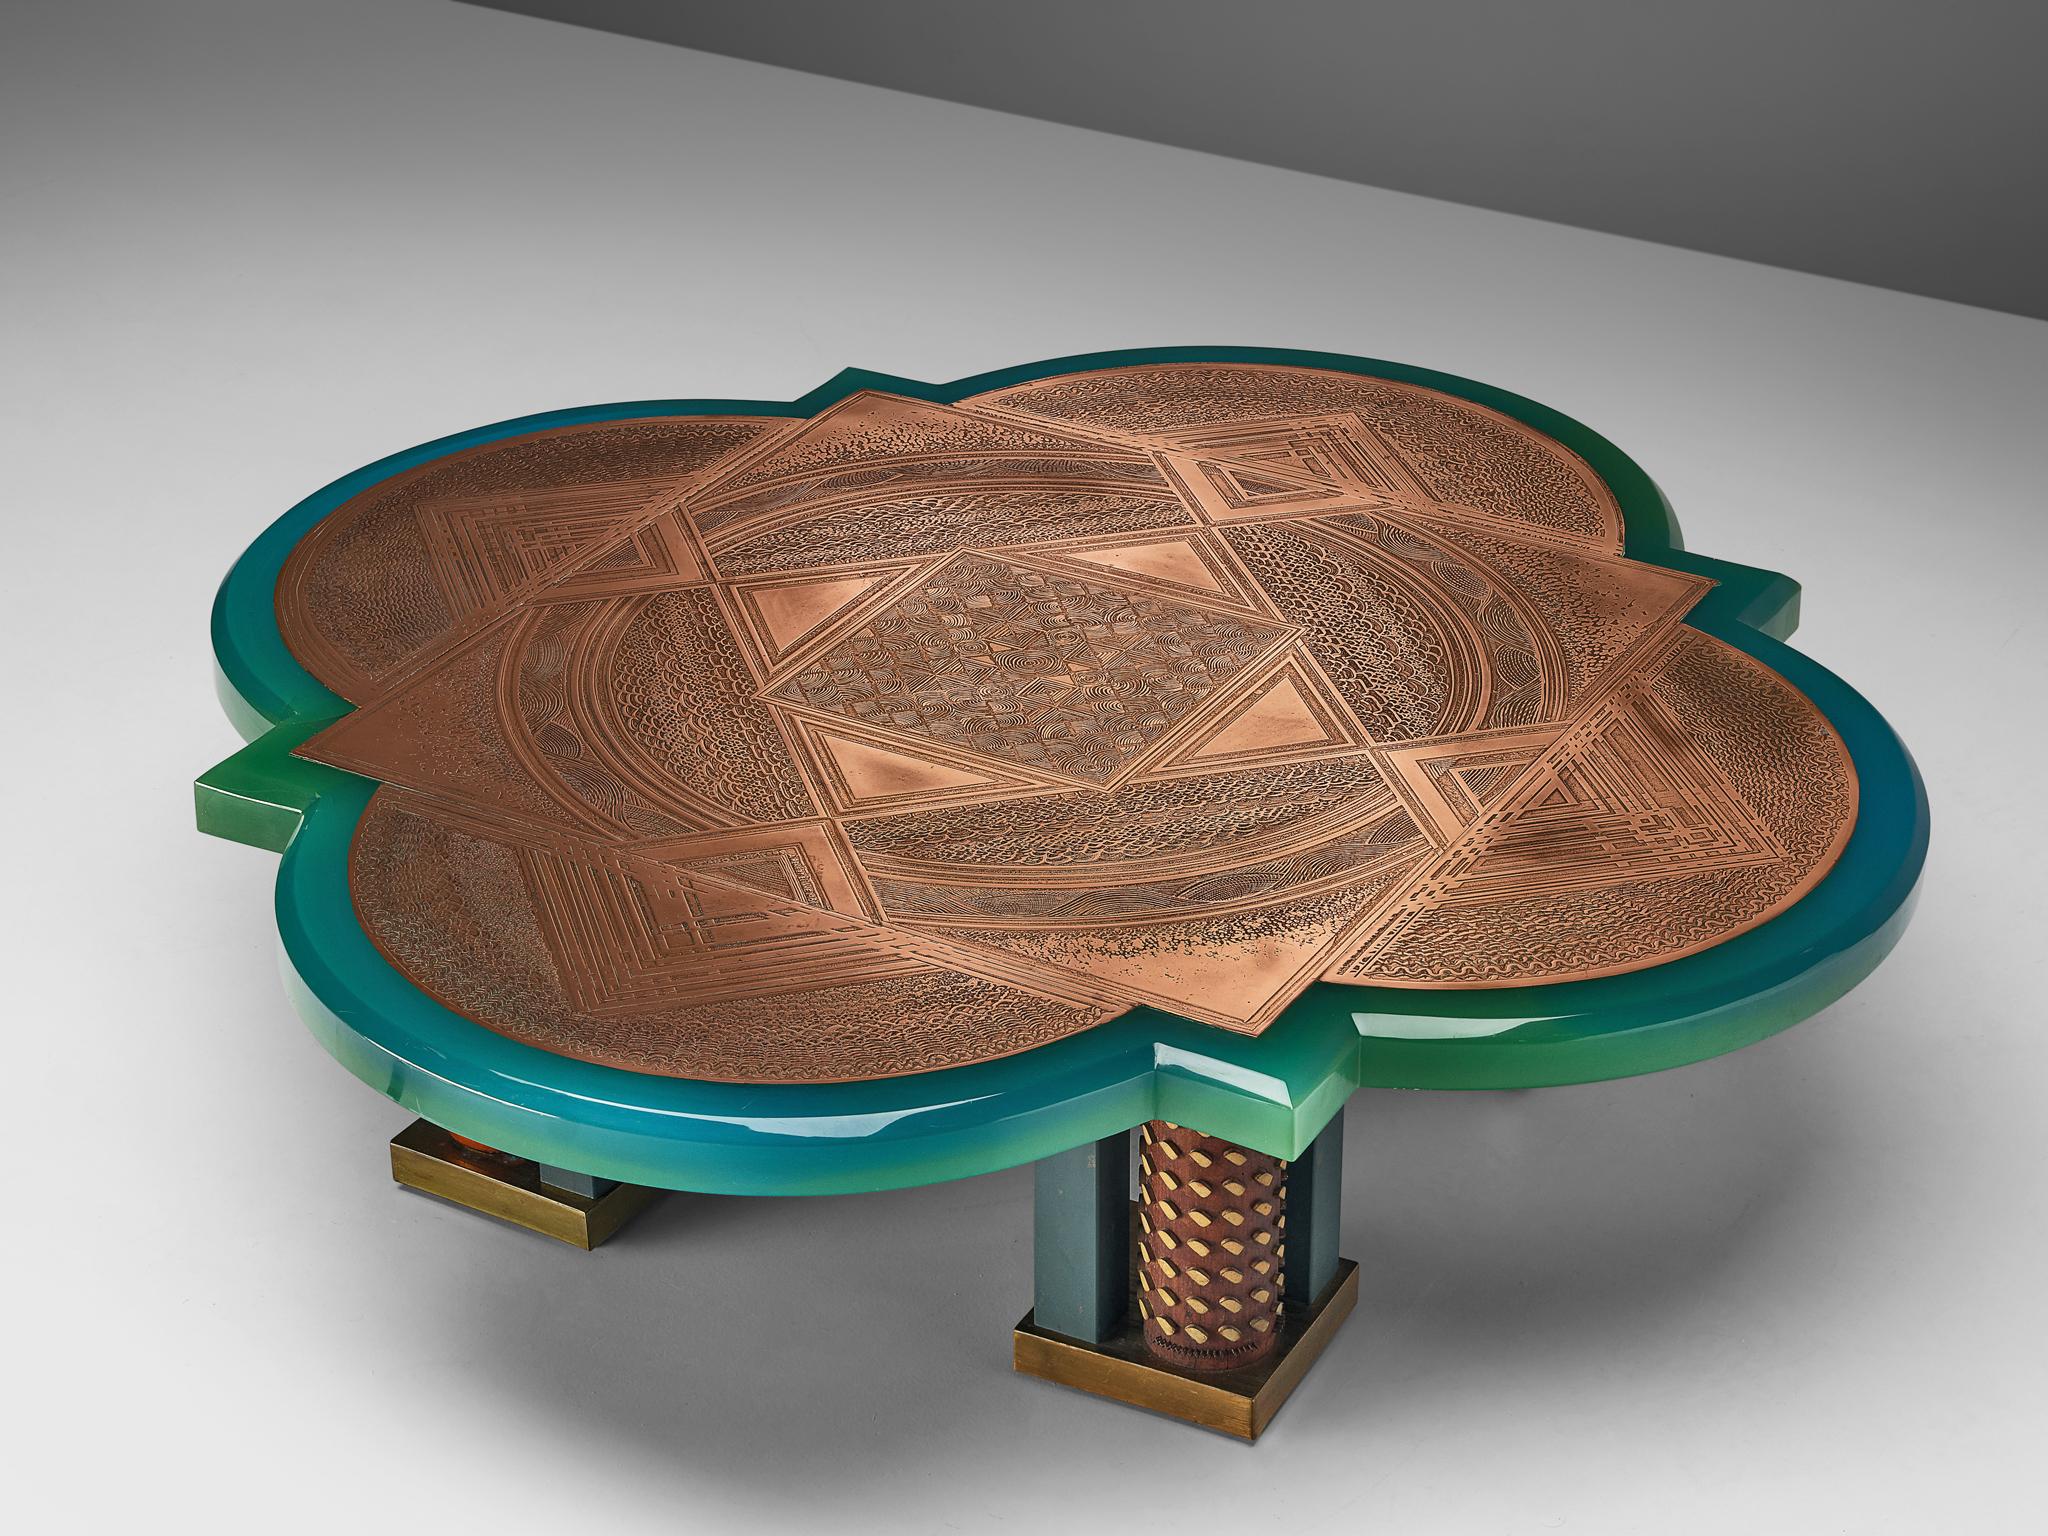 Unique Armand Jonckers Coffee Table in Green Resin and Copper  For Sale 4